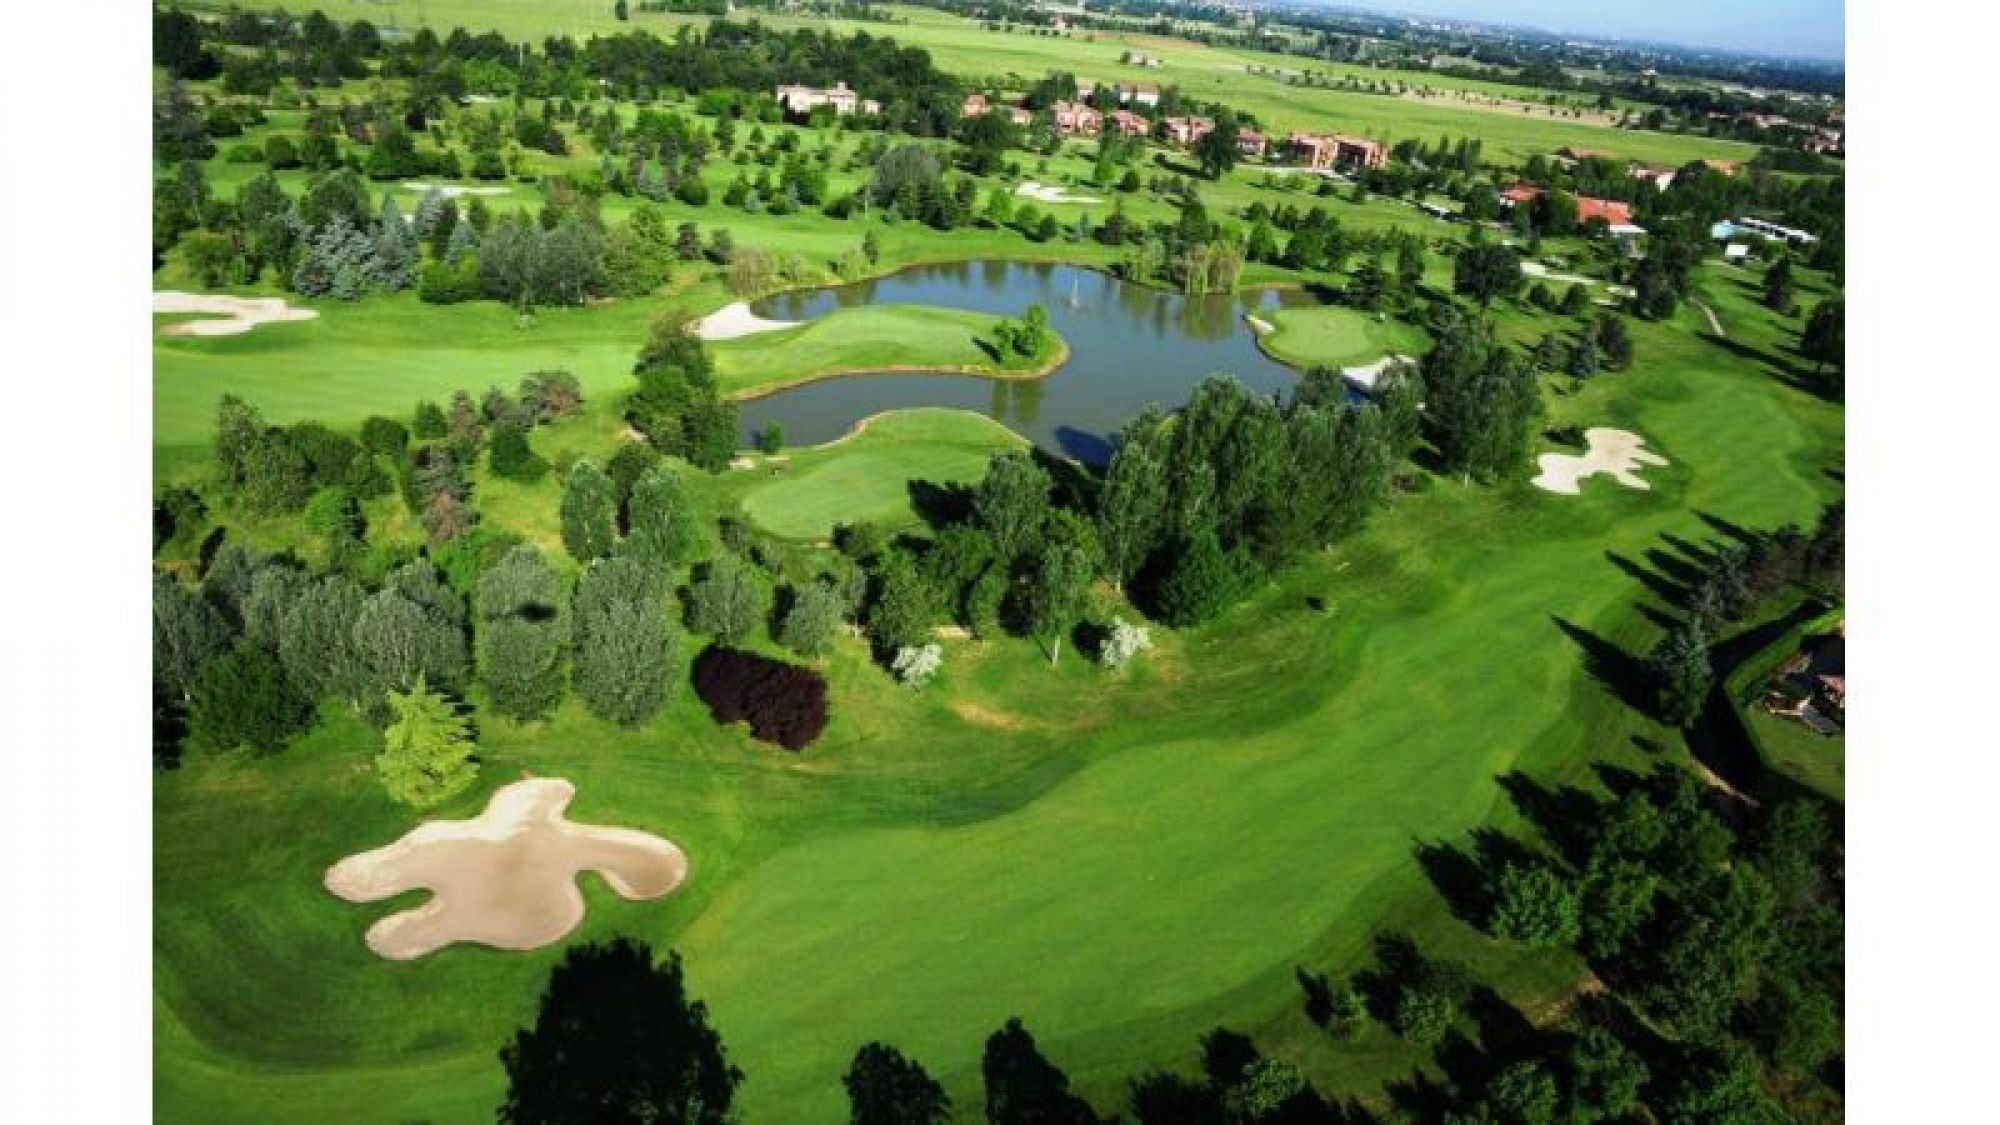 Modena Golf & Country Club consists of several of the leading golf course near Northern Italy